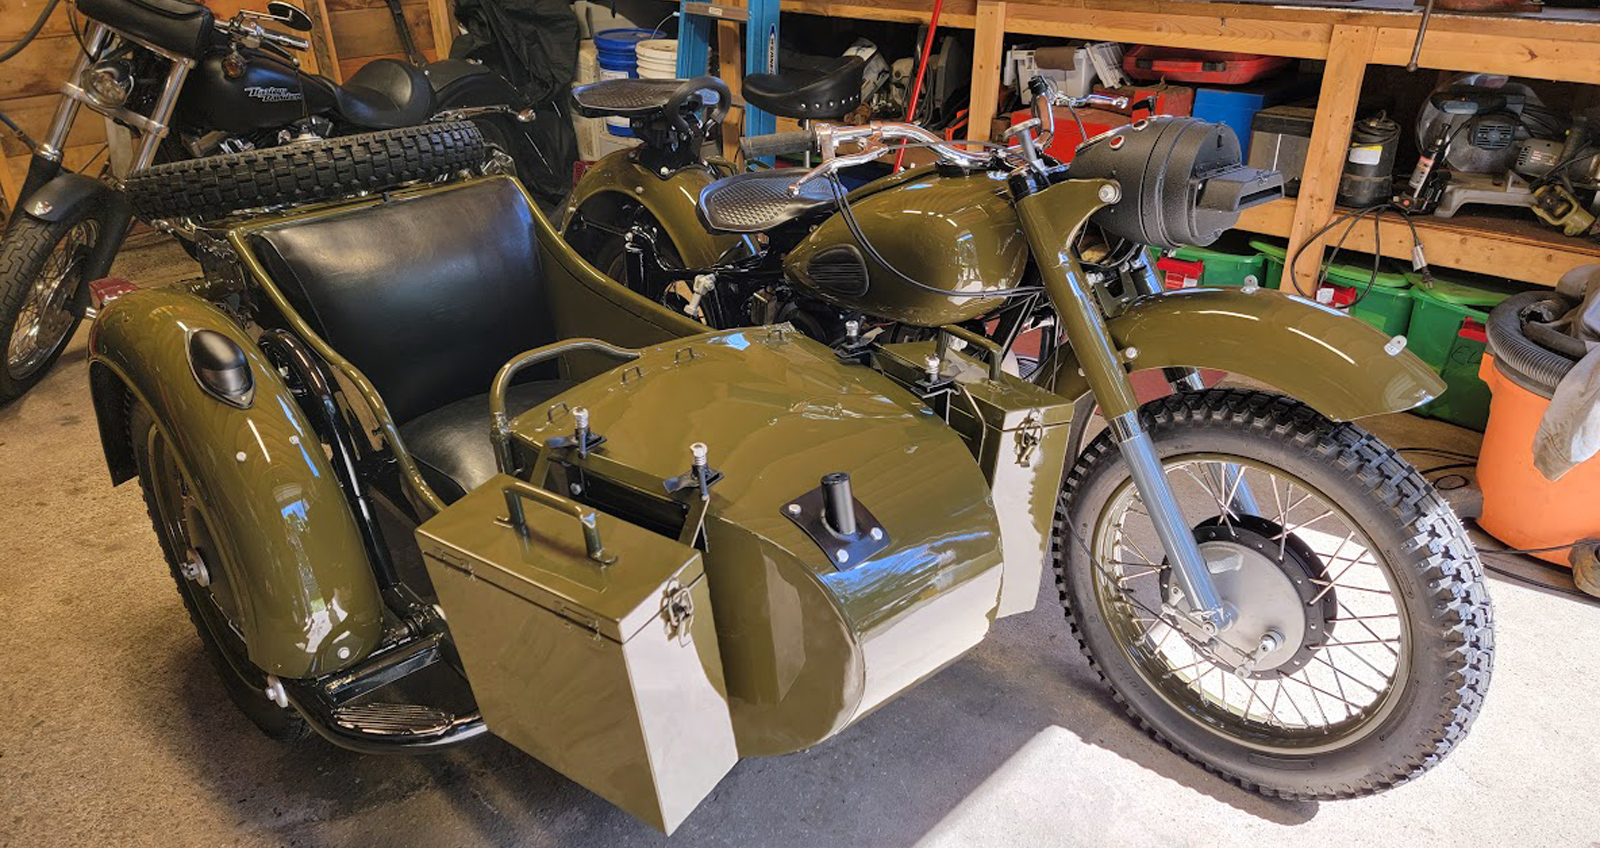 Doug's Cycle Barn specializes in vintage motorcycle restoration services